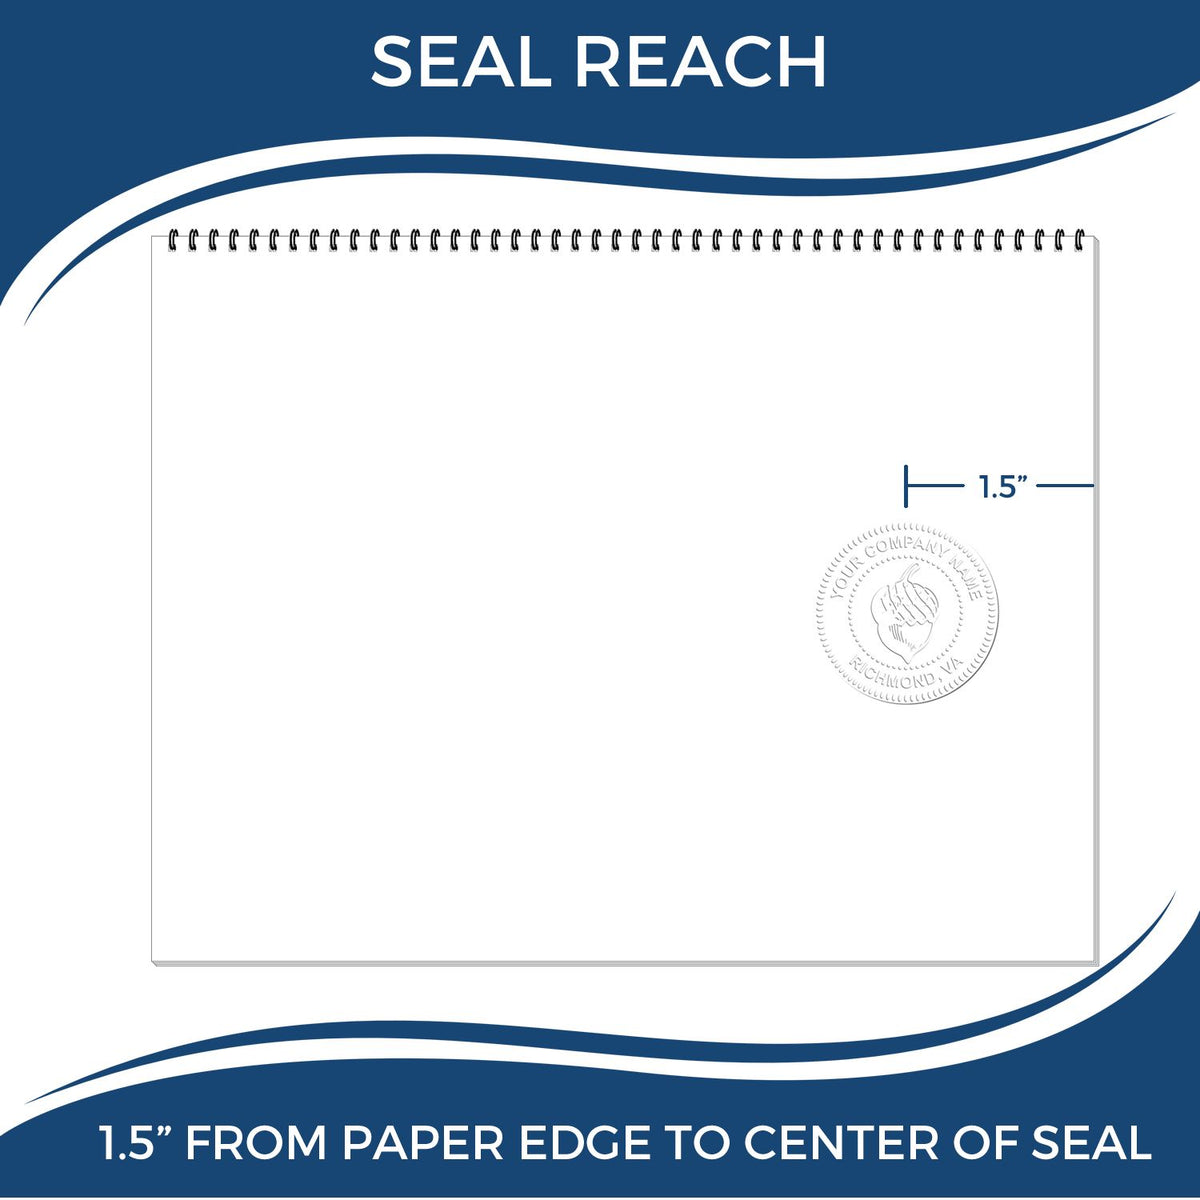 An infographic showing the seal reach which is represented by a ruler and a miniature seal image of the Oklahoma Desk Architect Embossing Seal